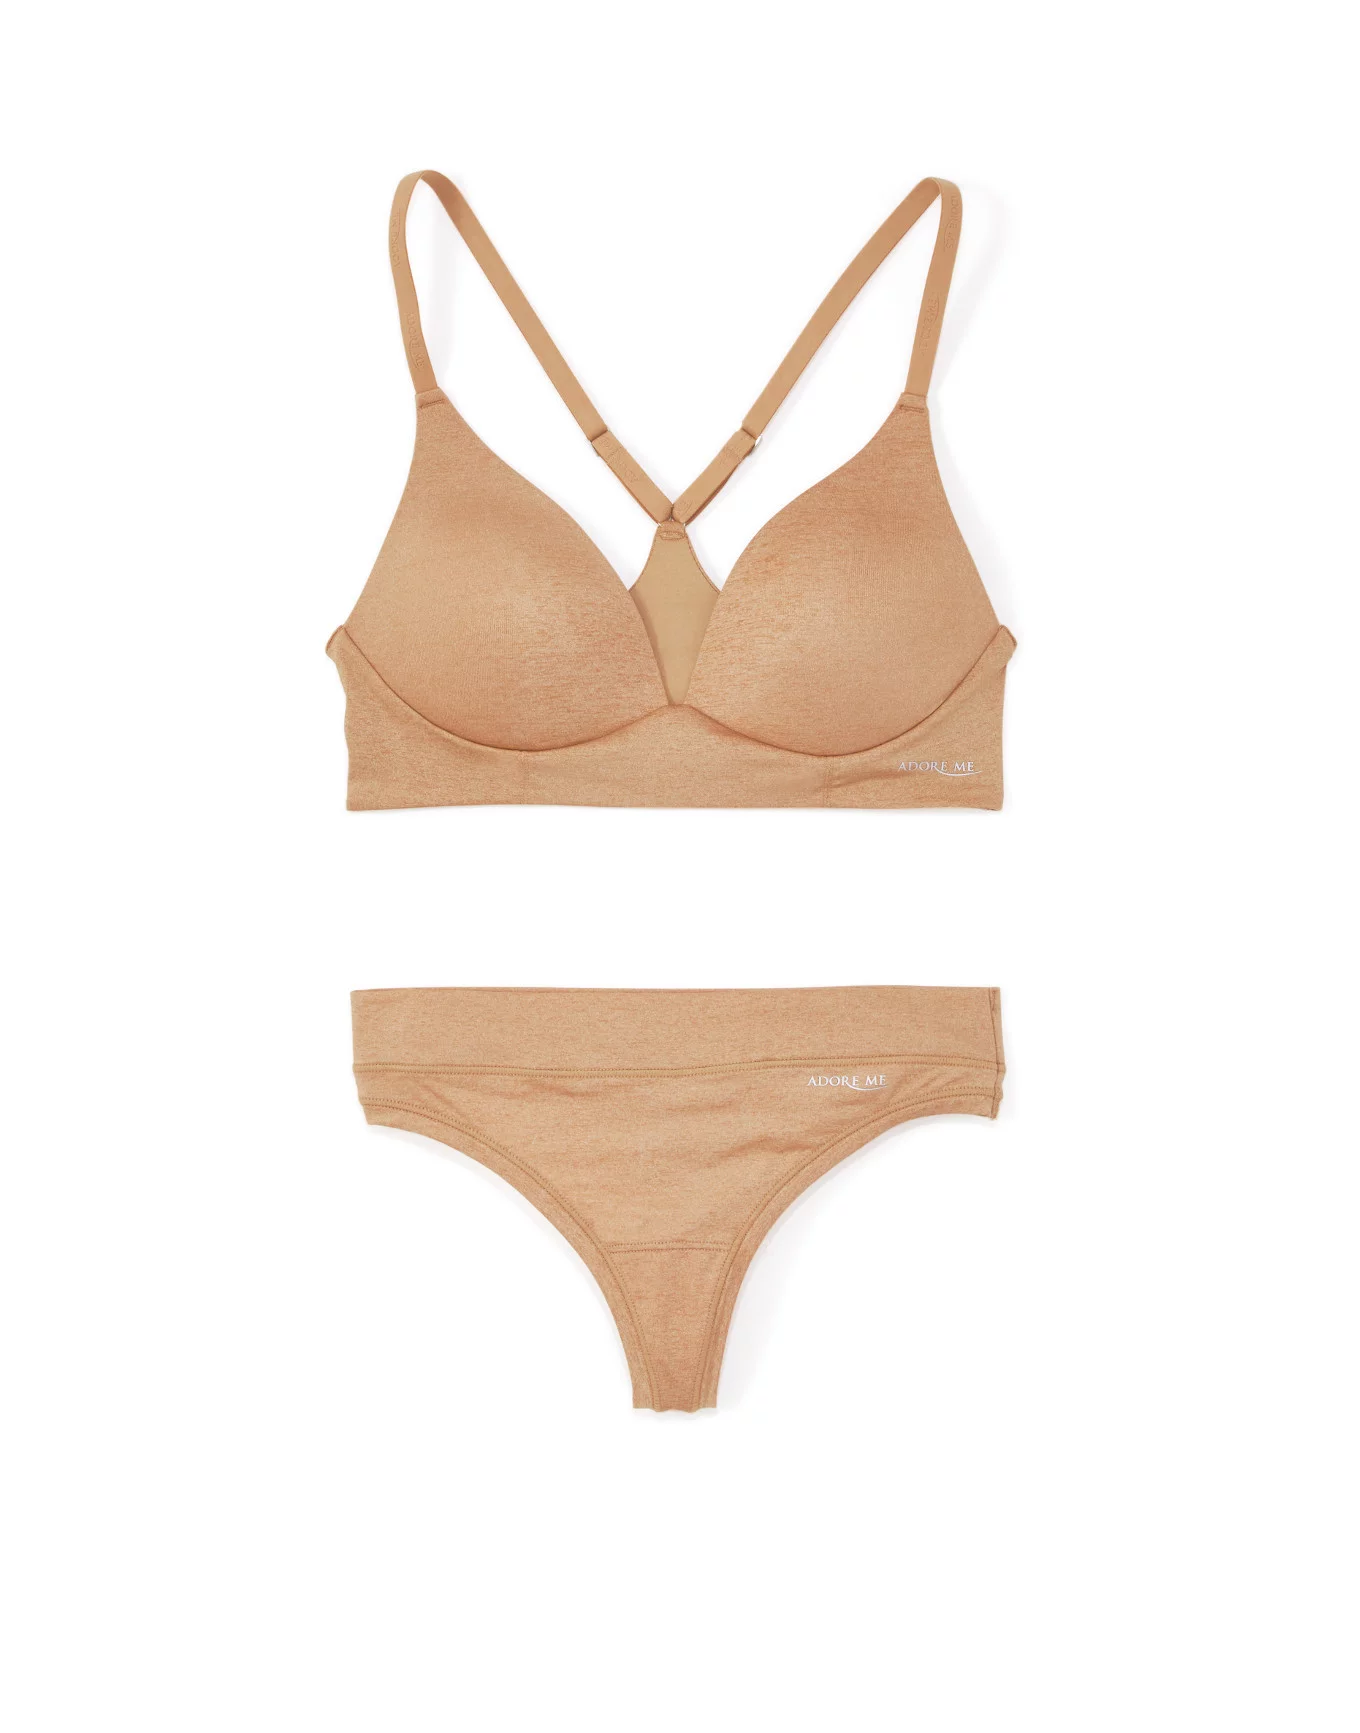 Spanx Bra Review: 6 Women Try Different Styles to See How They Stack up